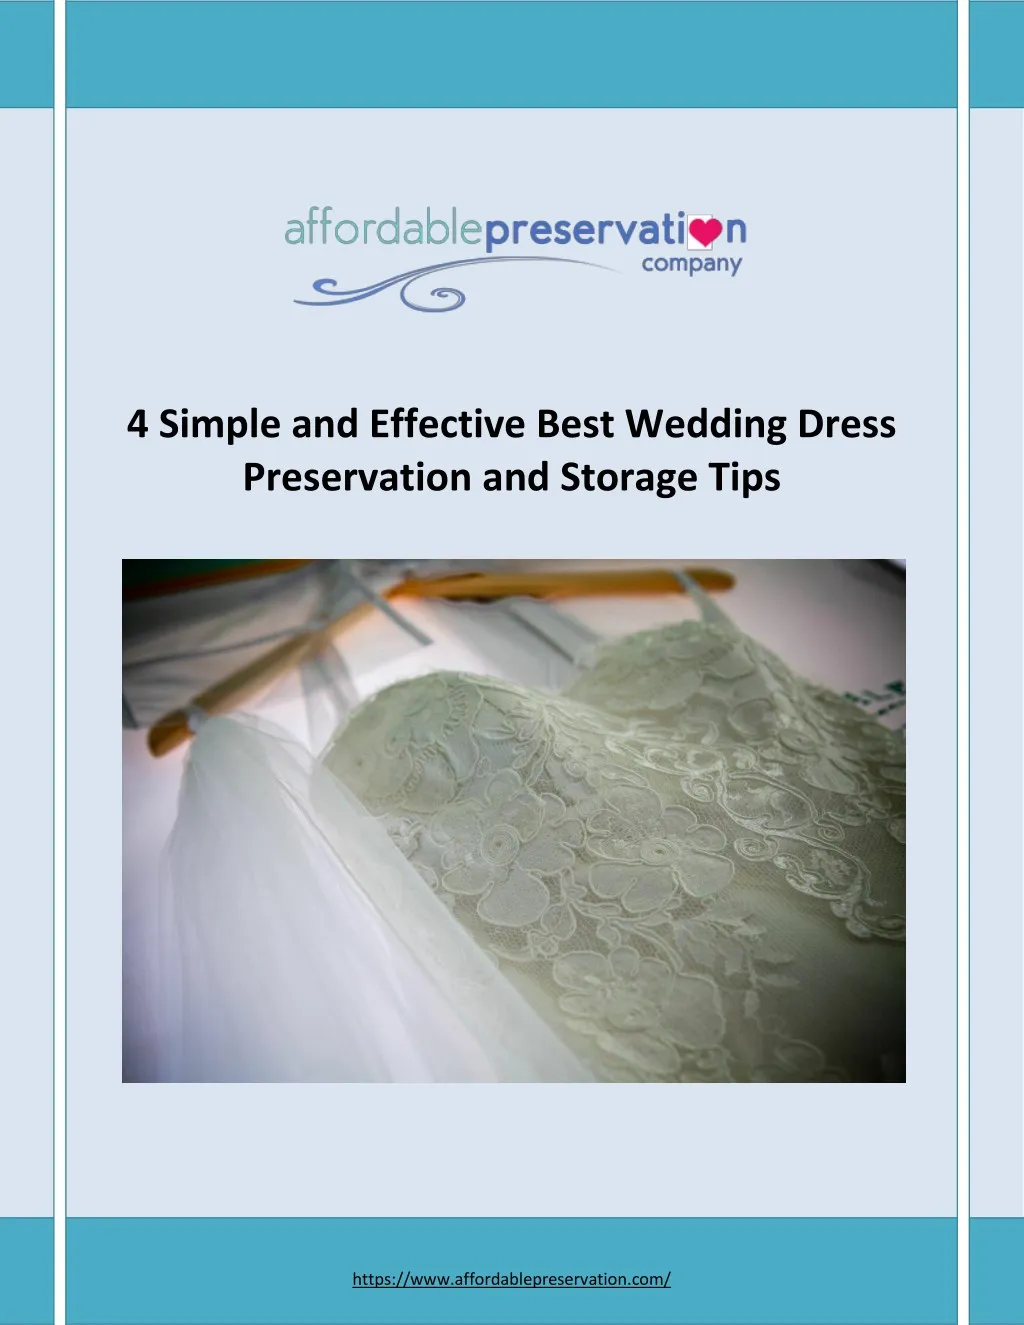 4 simple and effective best wedding dress